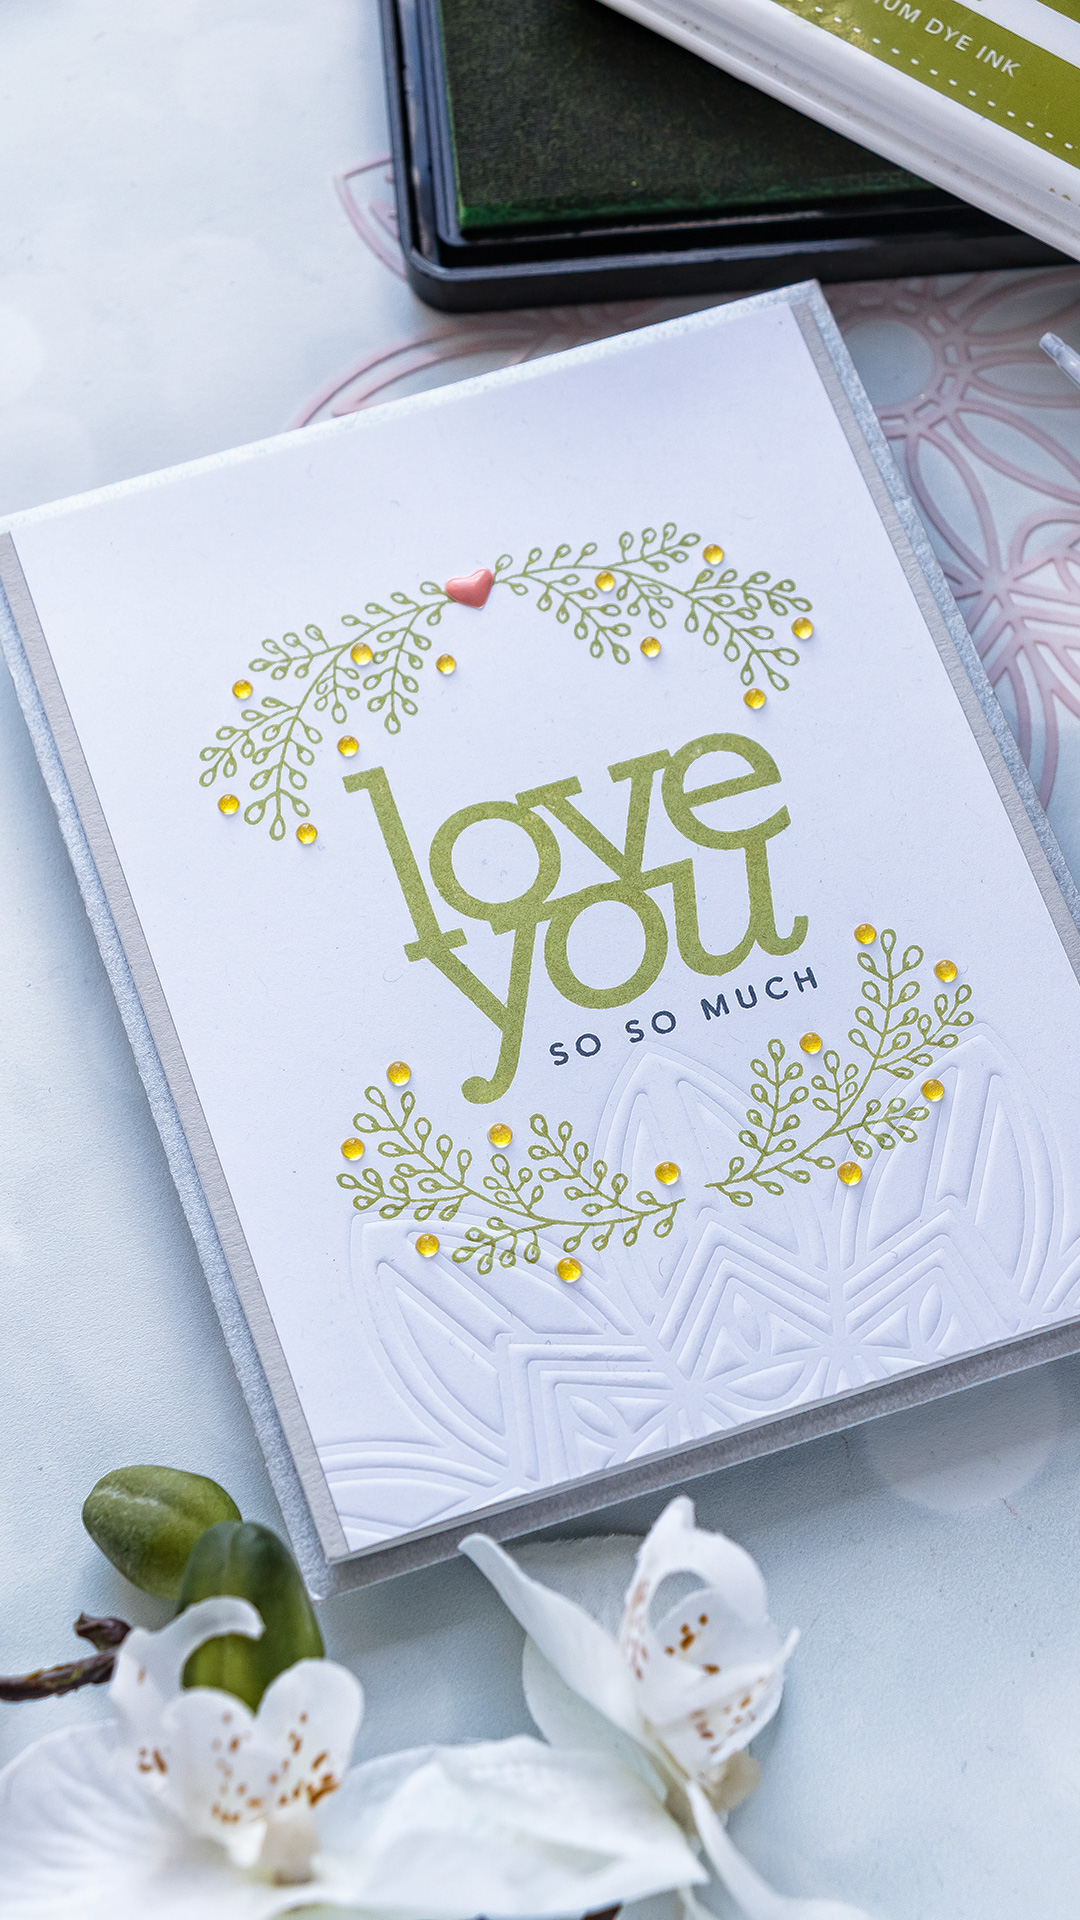 Simon Says Stamp | Subtle Dry Embossed Details with a Stencil. Photo Tutorial by Yana Smakula #simonsaysstamp #cardmaking #dryembossing 